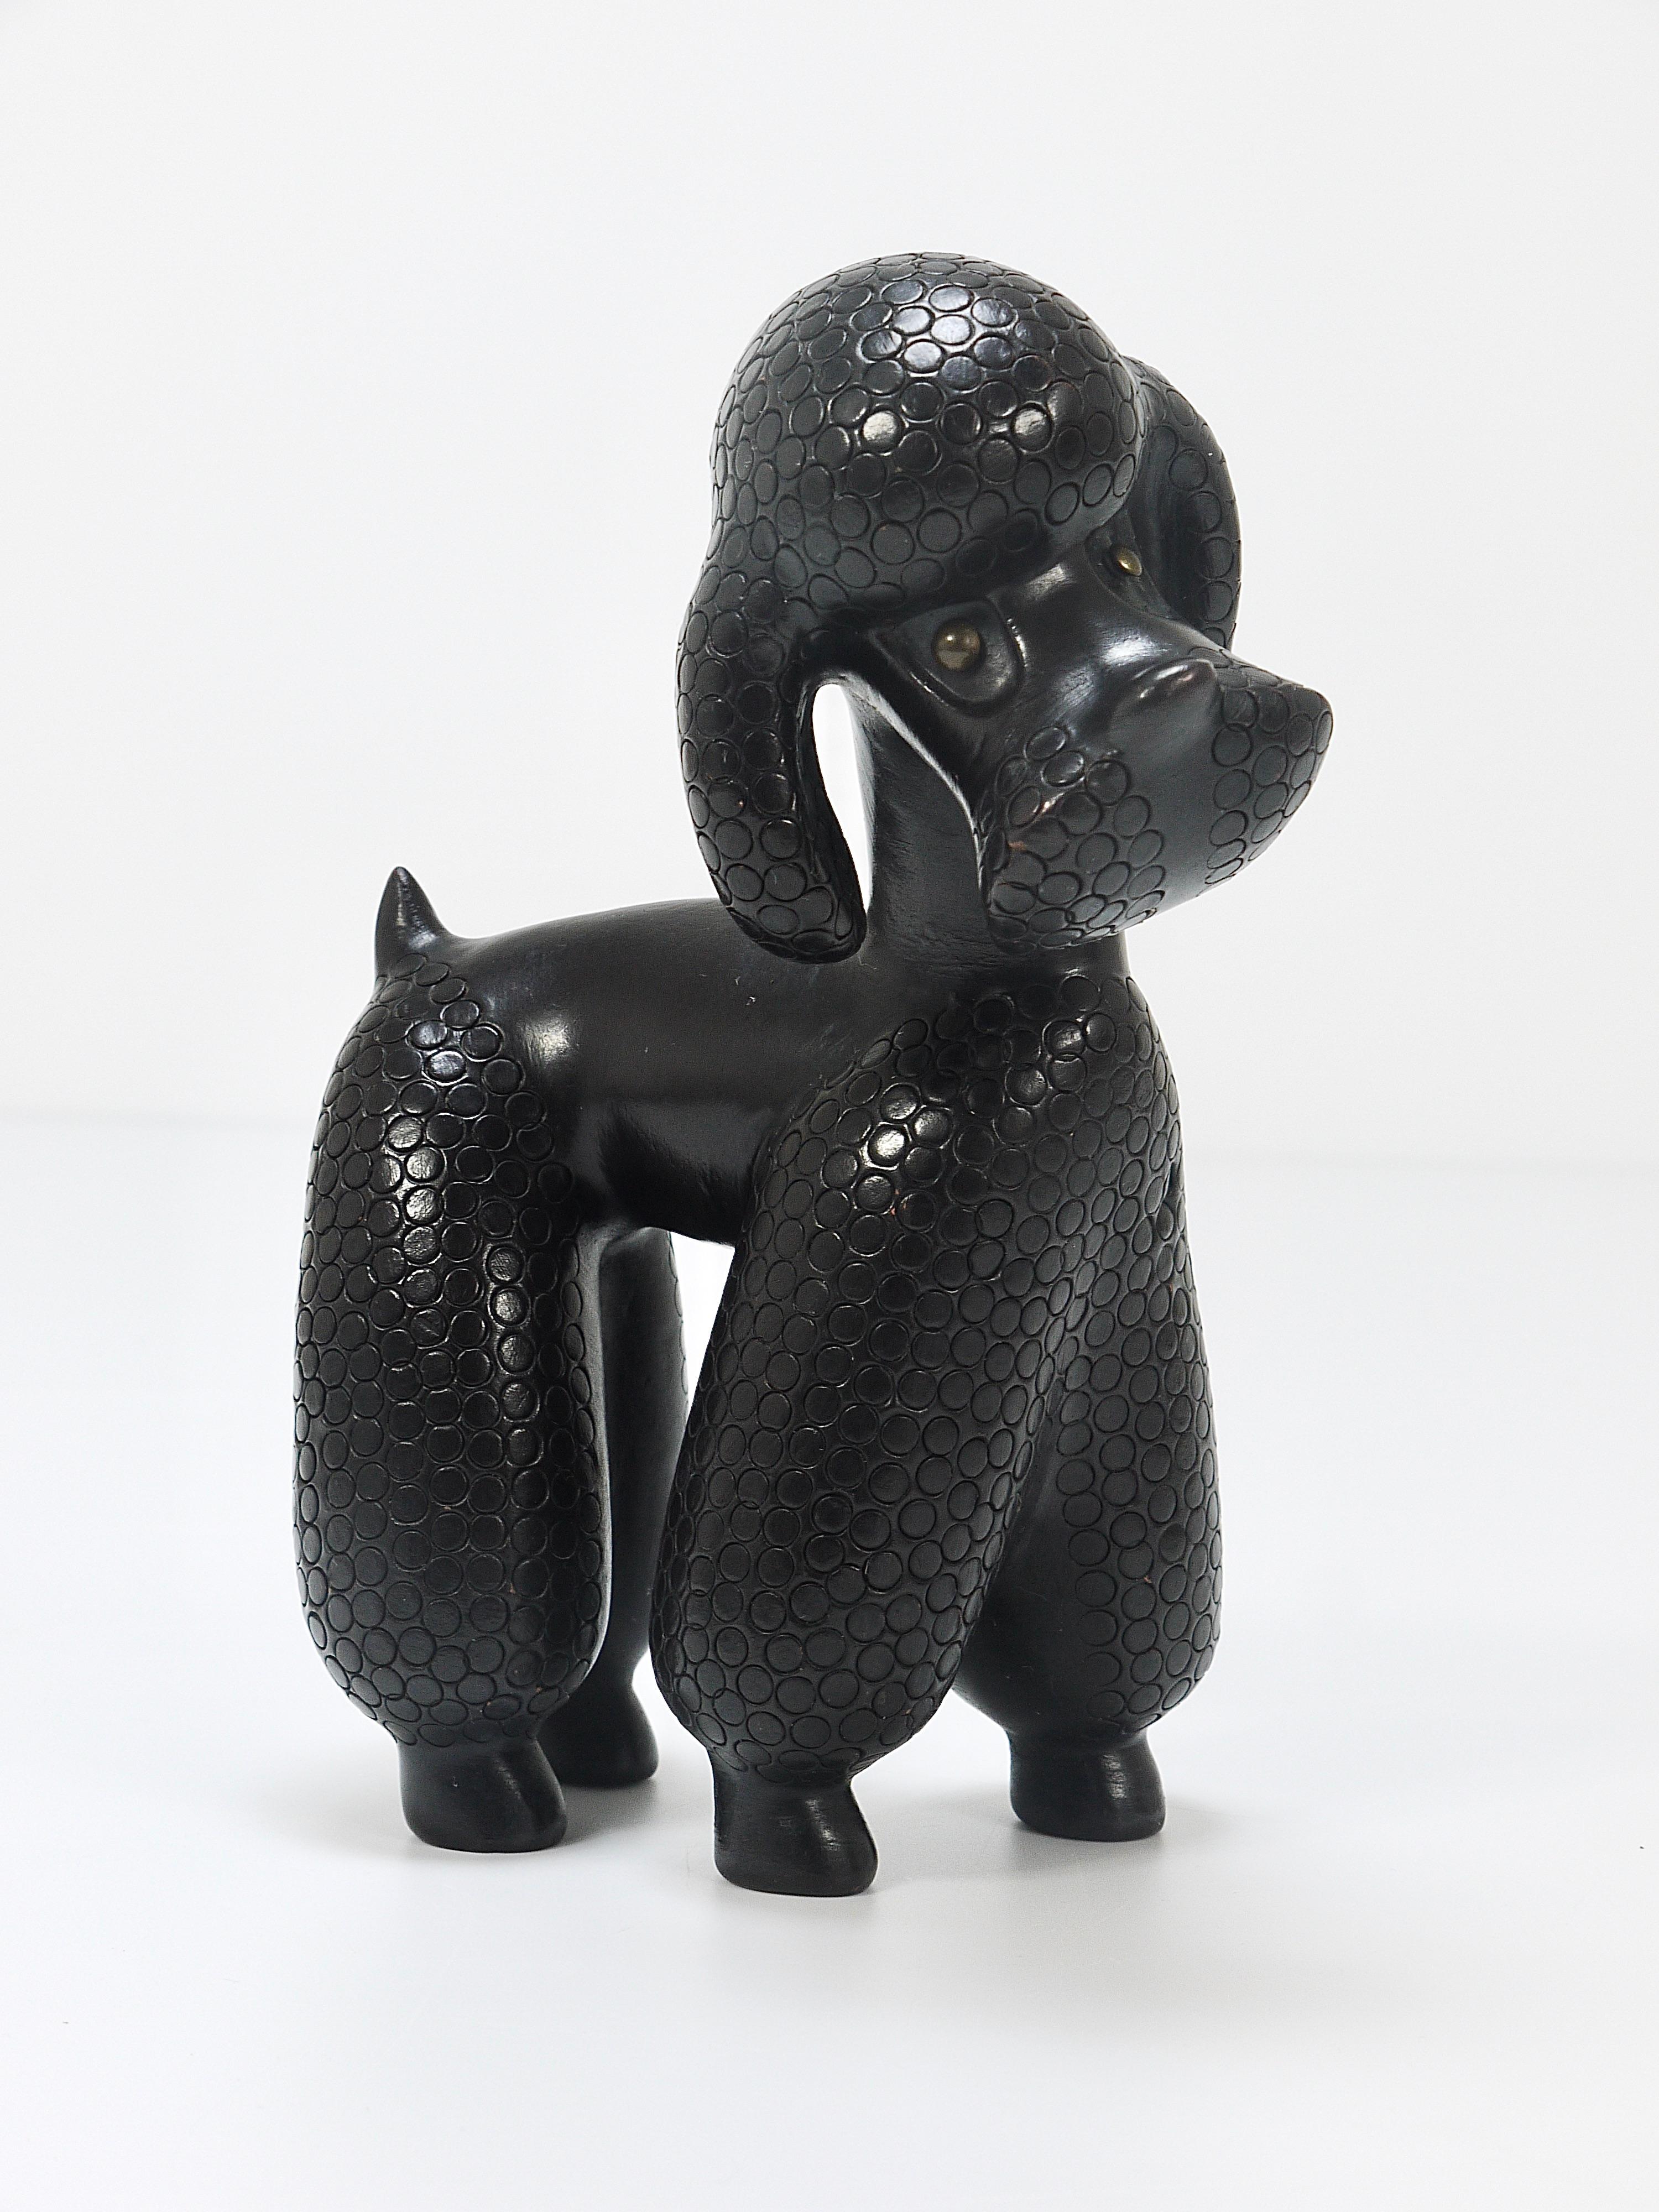 Charming Dog Poodle Sculpture Figurine by Leopold Anzengruber, Austria, 1950s 1